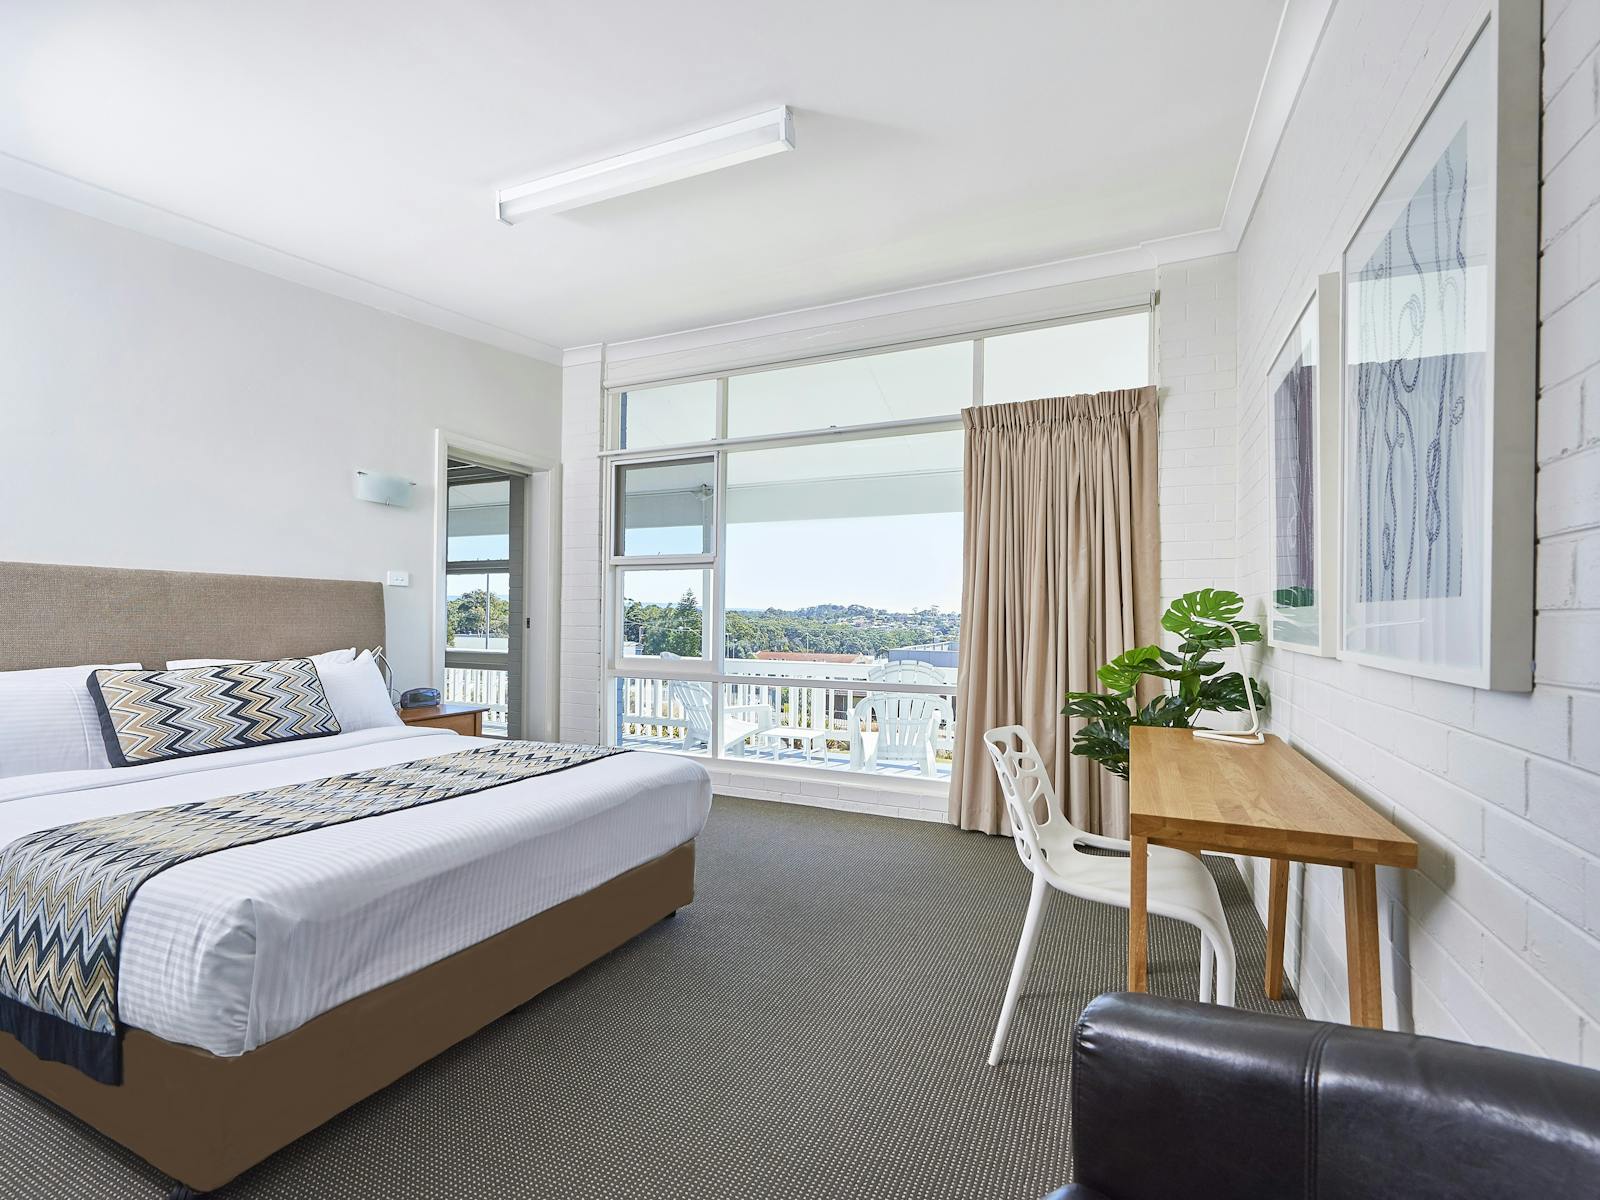 Apt 1,2,3 One Bedroom Apartment - queen sized bed, study desk and large balcony with views